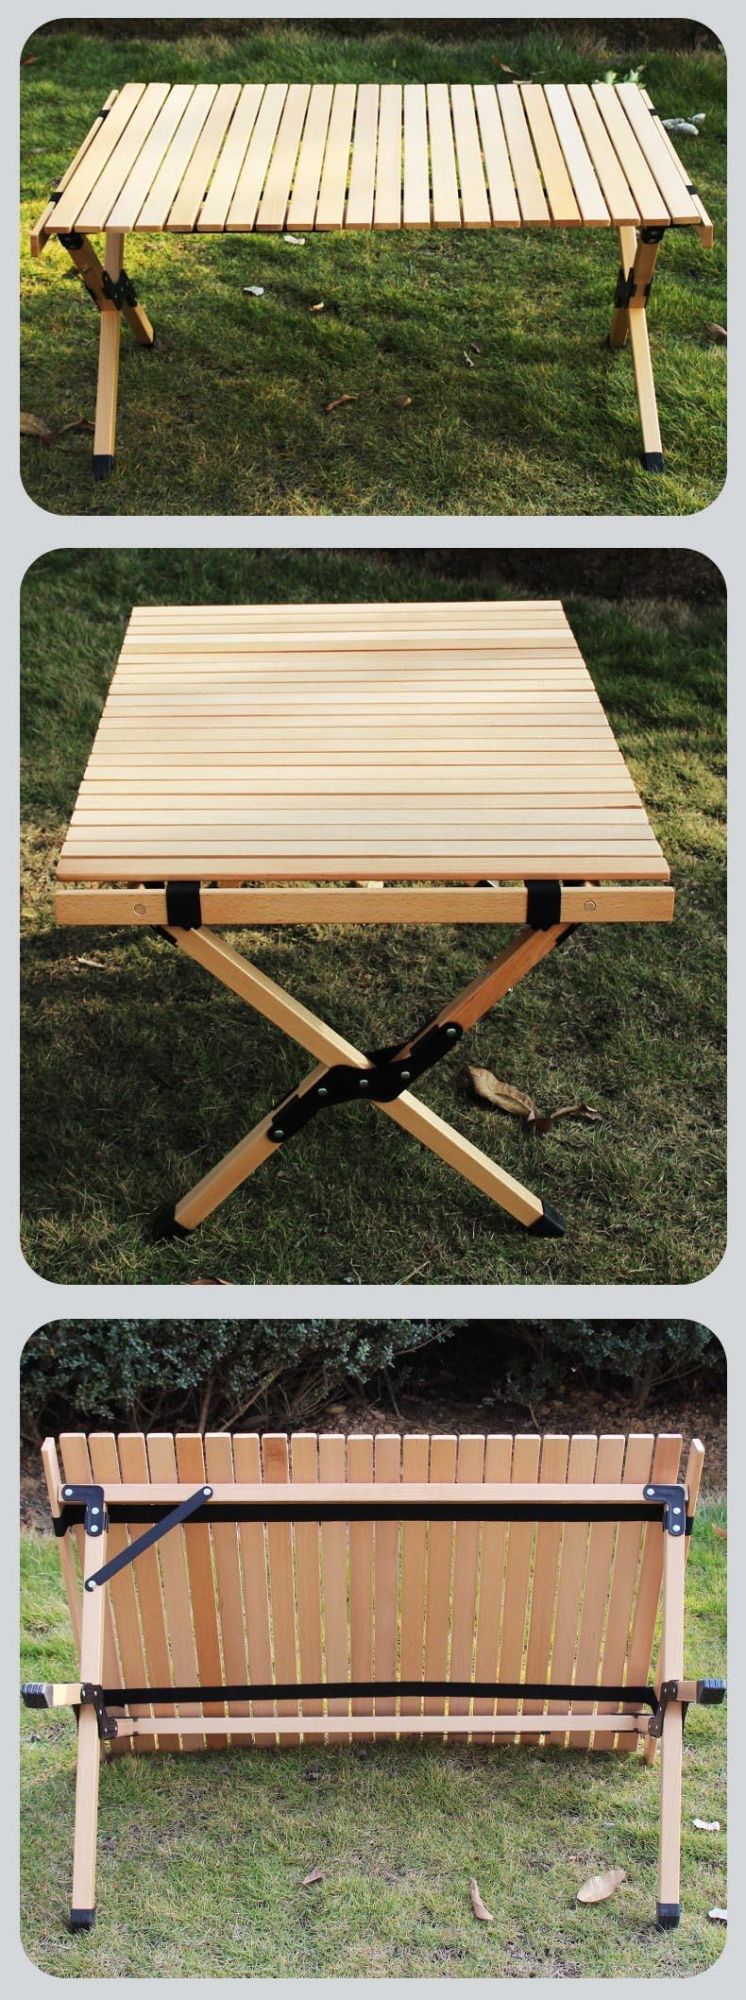 Top Seller Folding Tables and Chairs Wood Outdoor Camping for Garden Travel Hiking Picnic Egg Roll Table